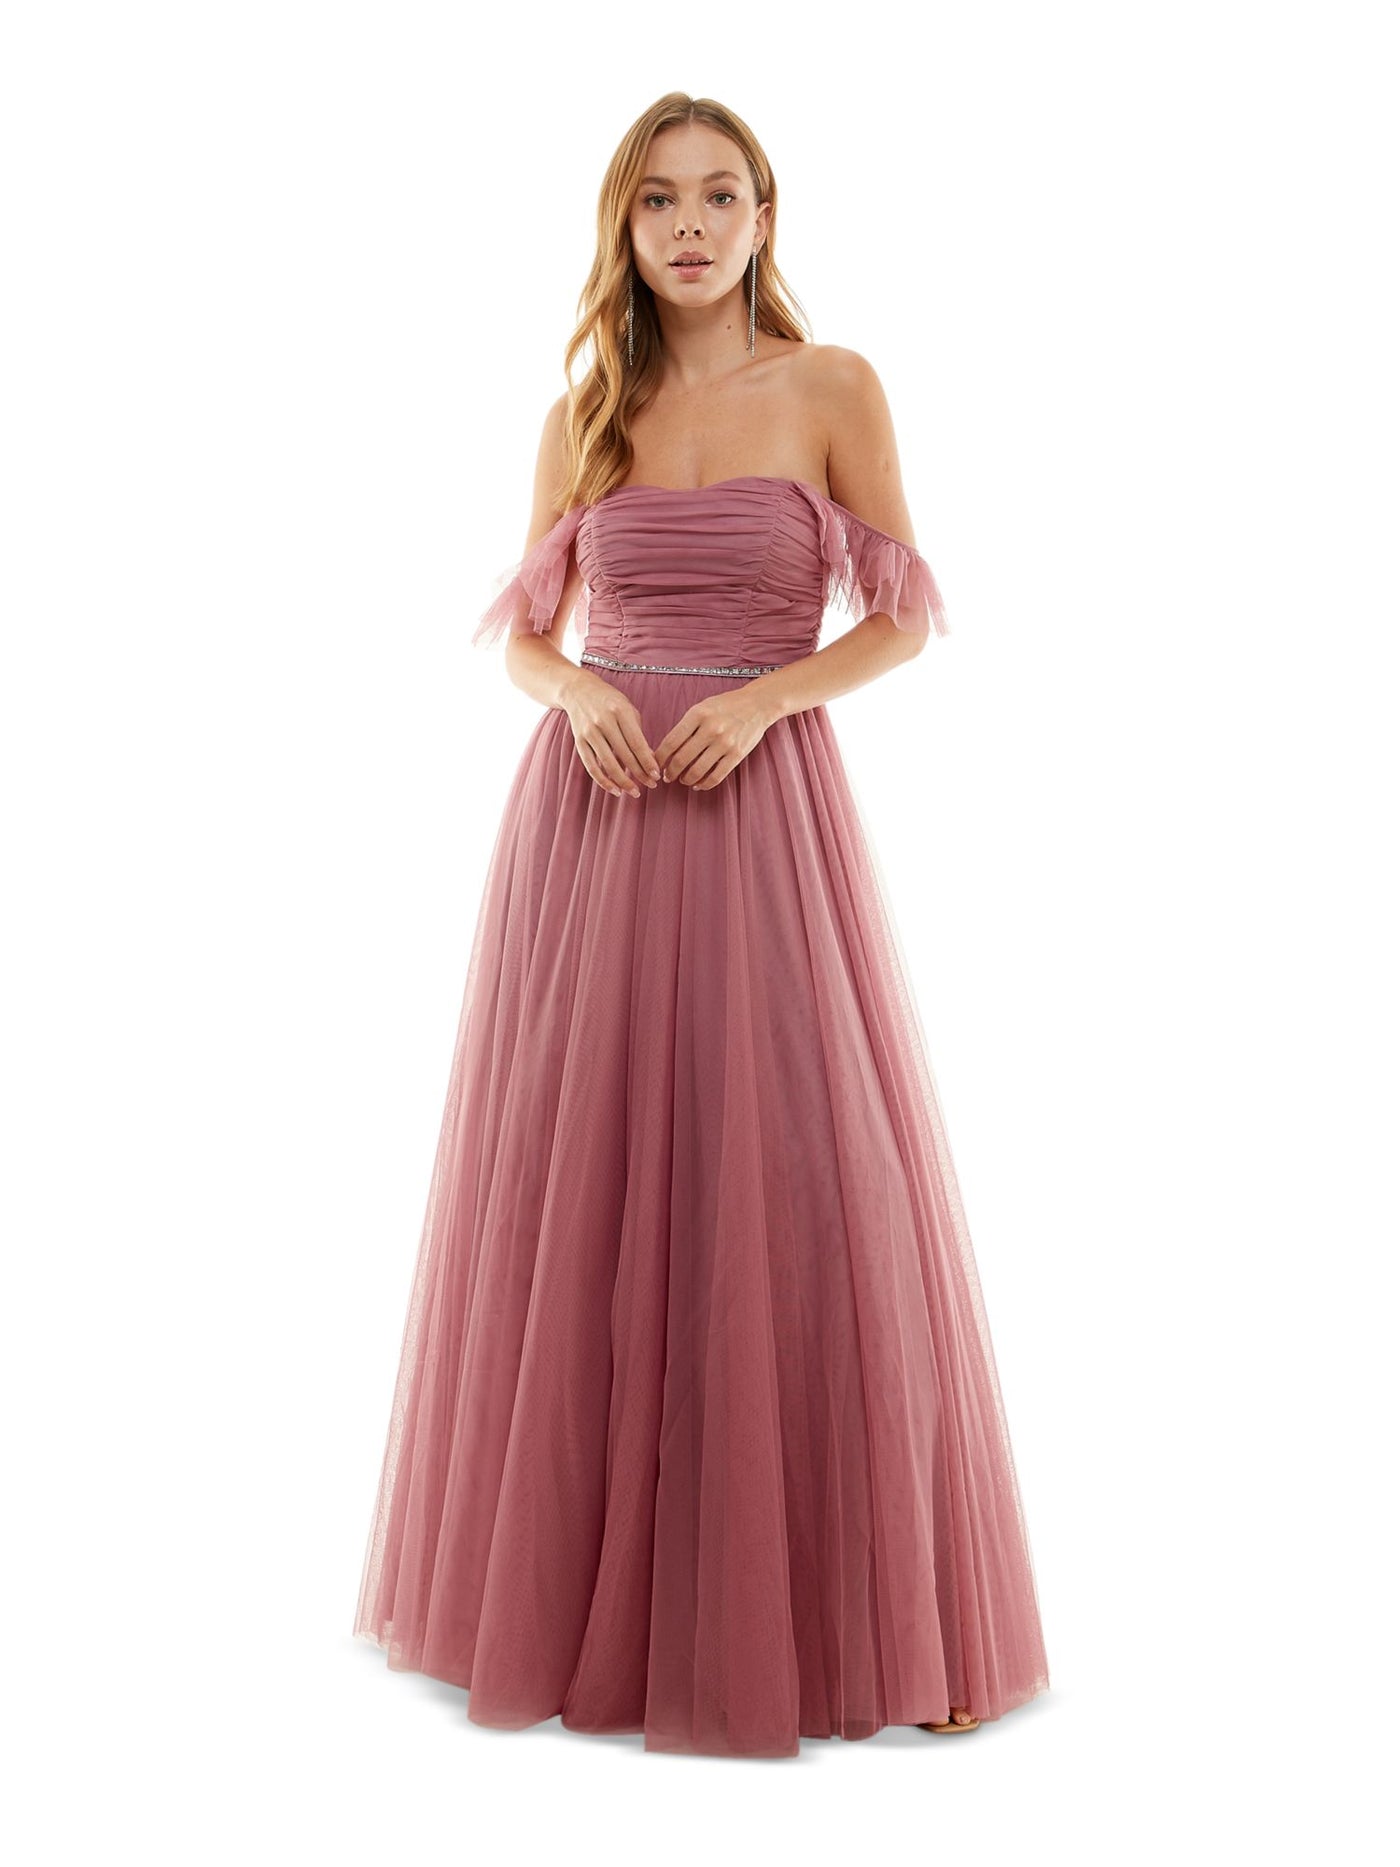 CITY STUDIO Womens Pink Ruffled Ruched Off Shoulder Straps Zippered Sweetheart Neckline Full-Length Formal Gown Dress Juniors 7